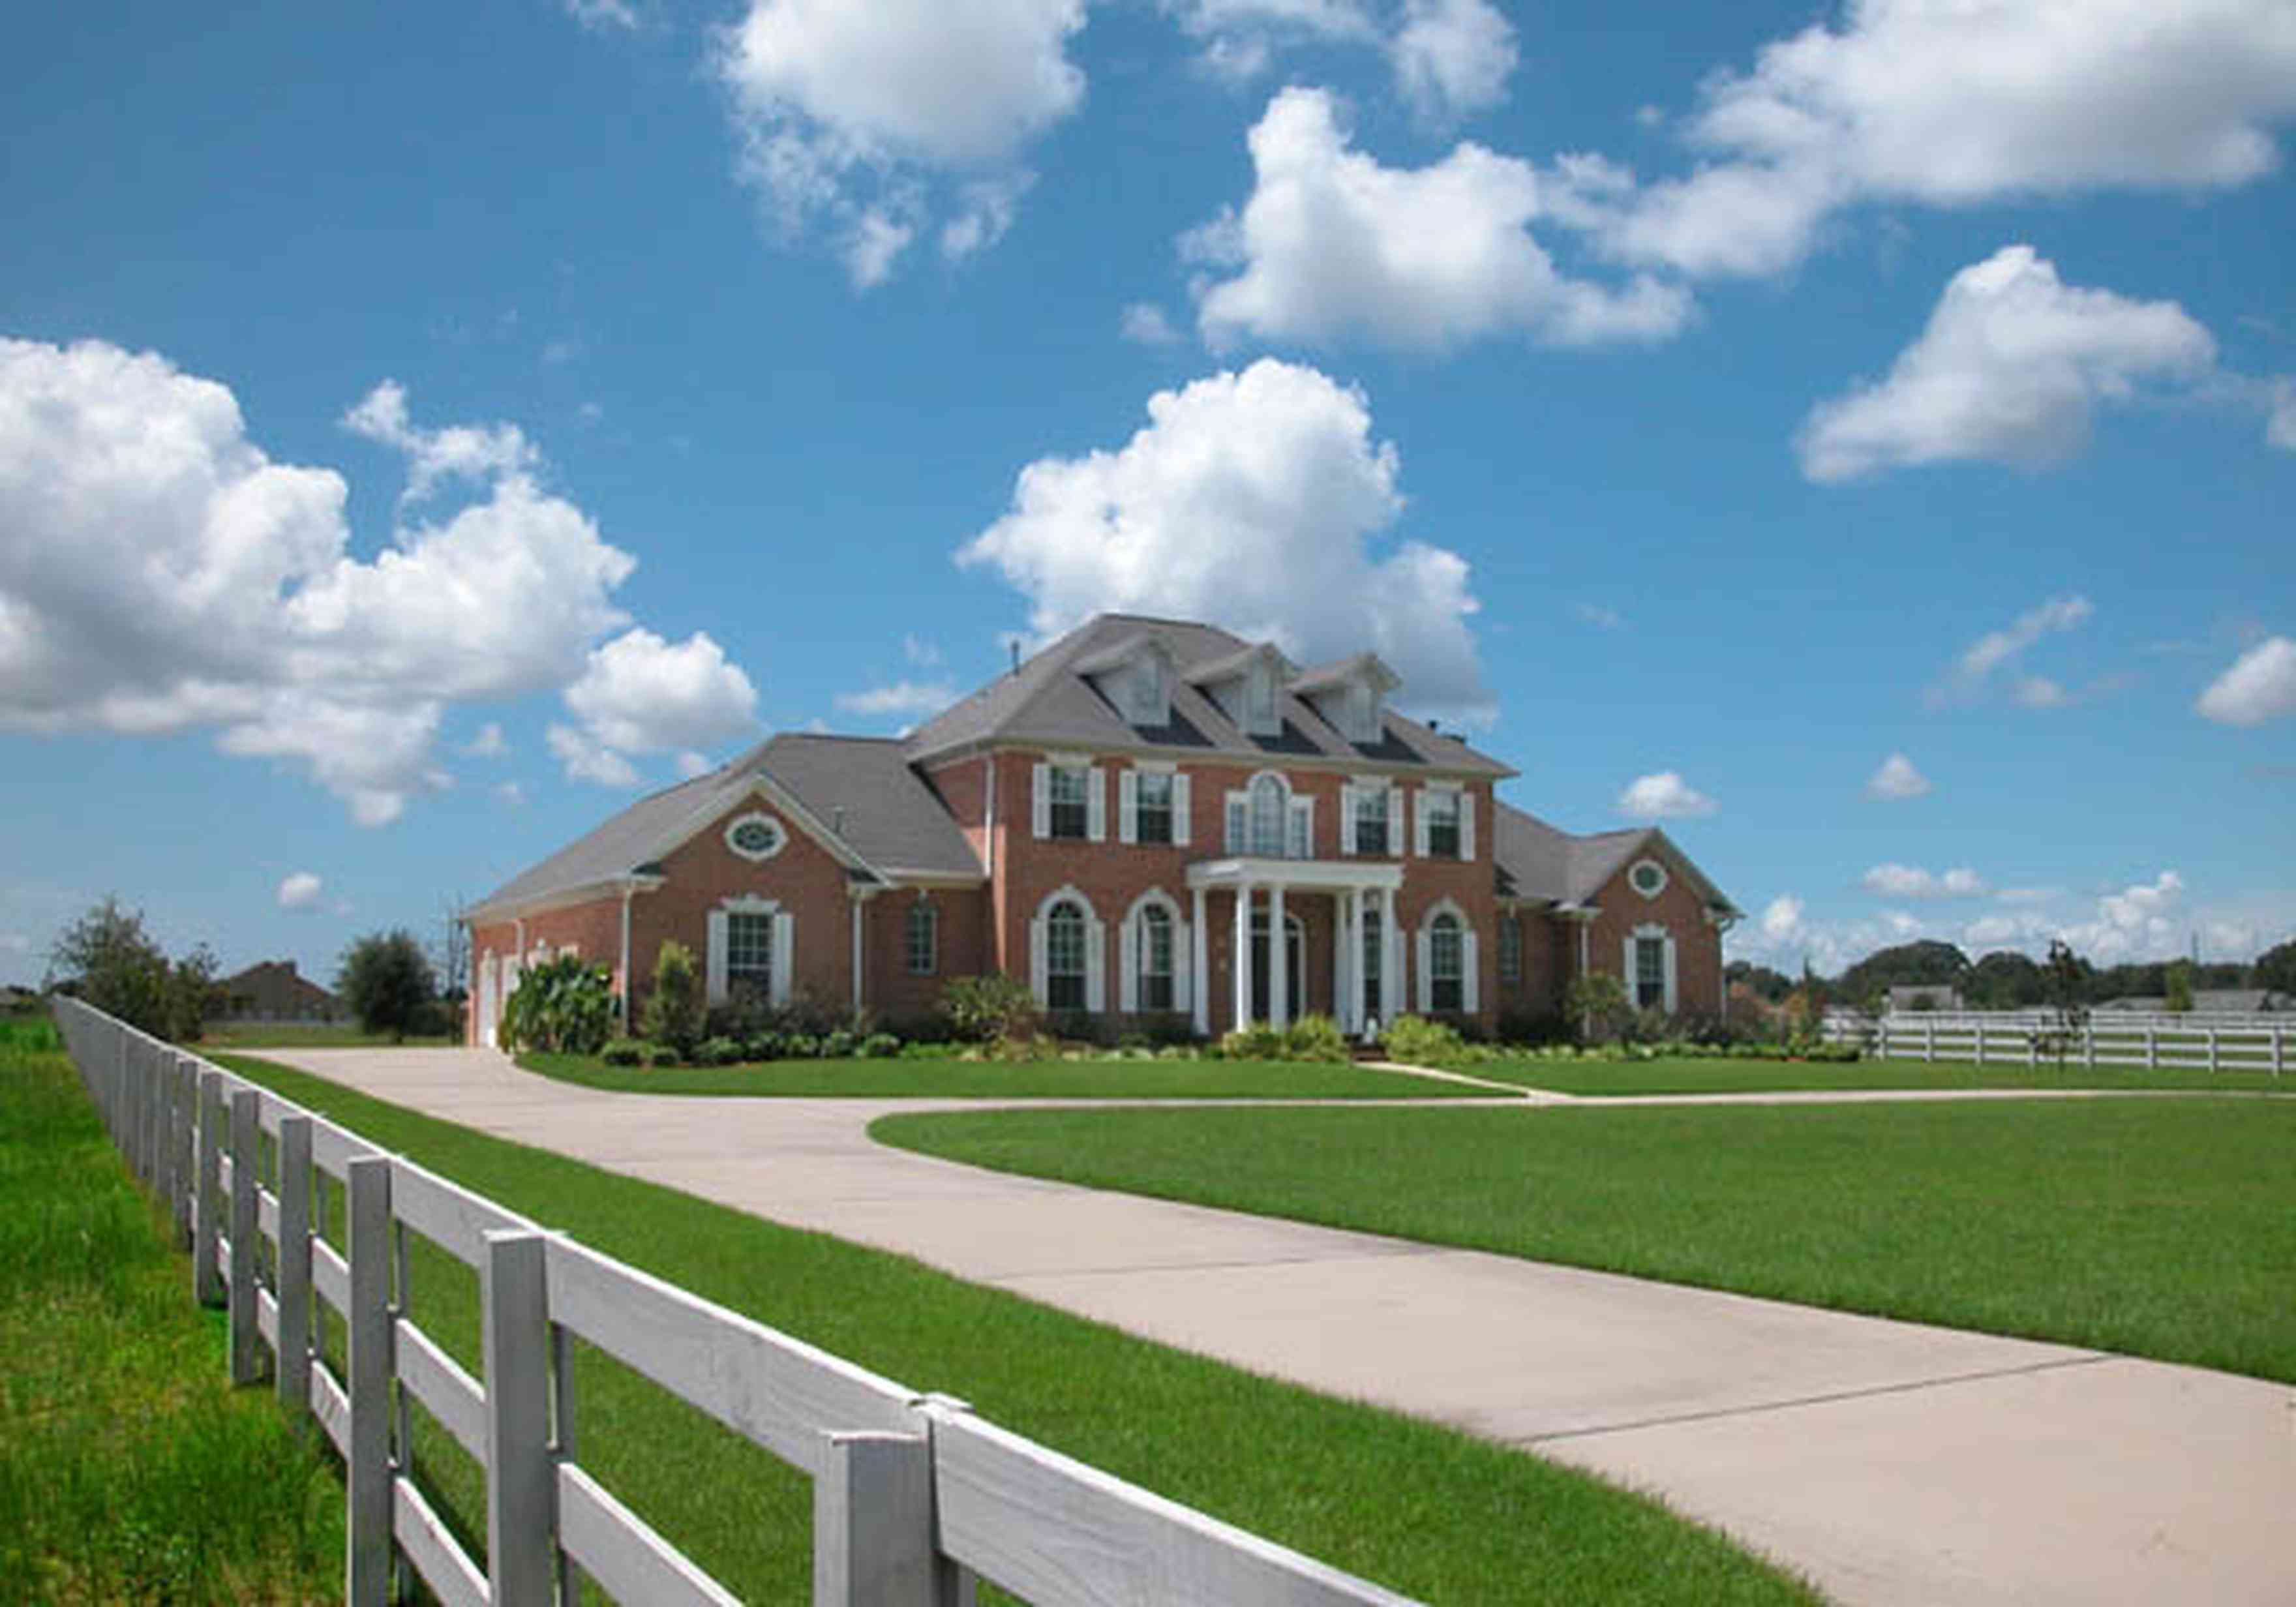 A large red brick, 3 story Ranch House at the end of a long concrete driveway.